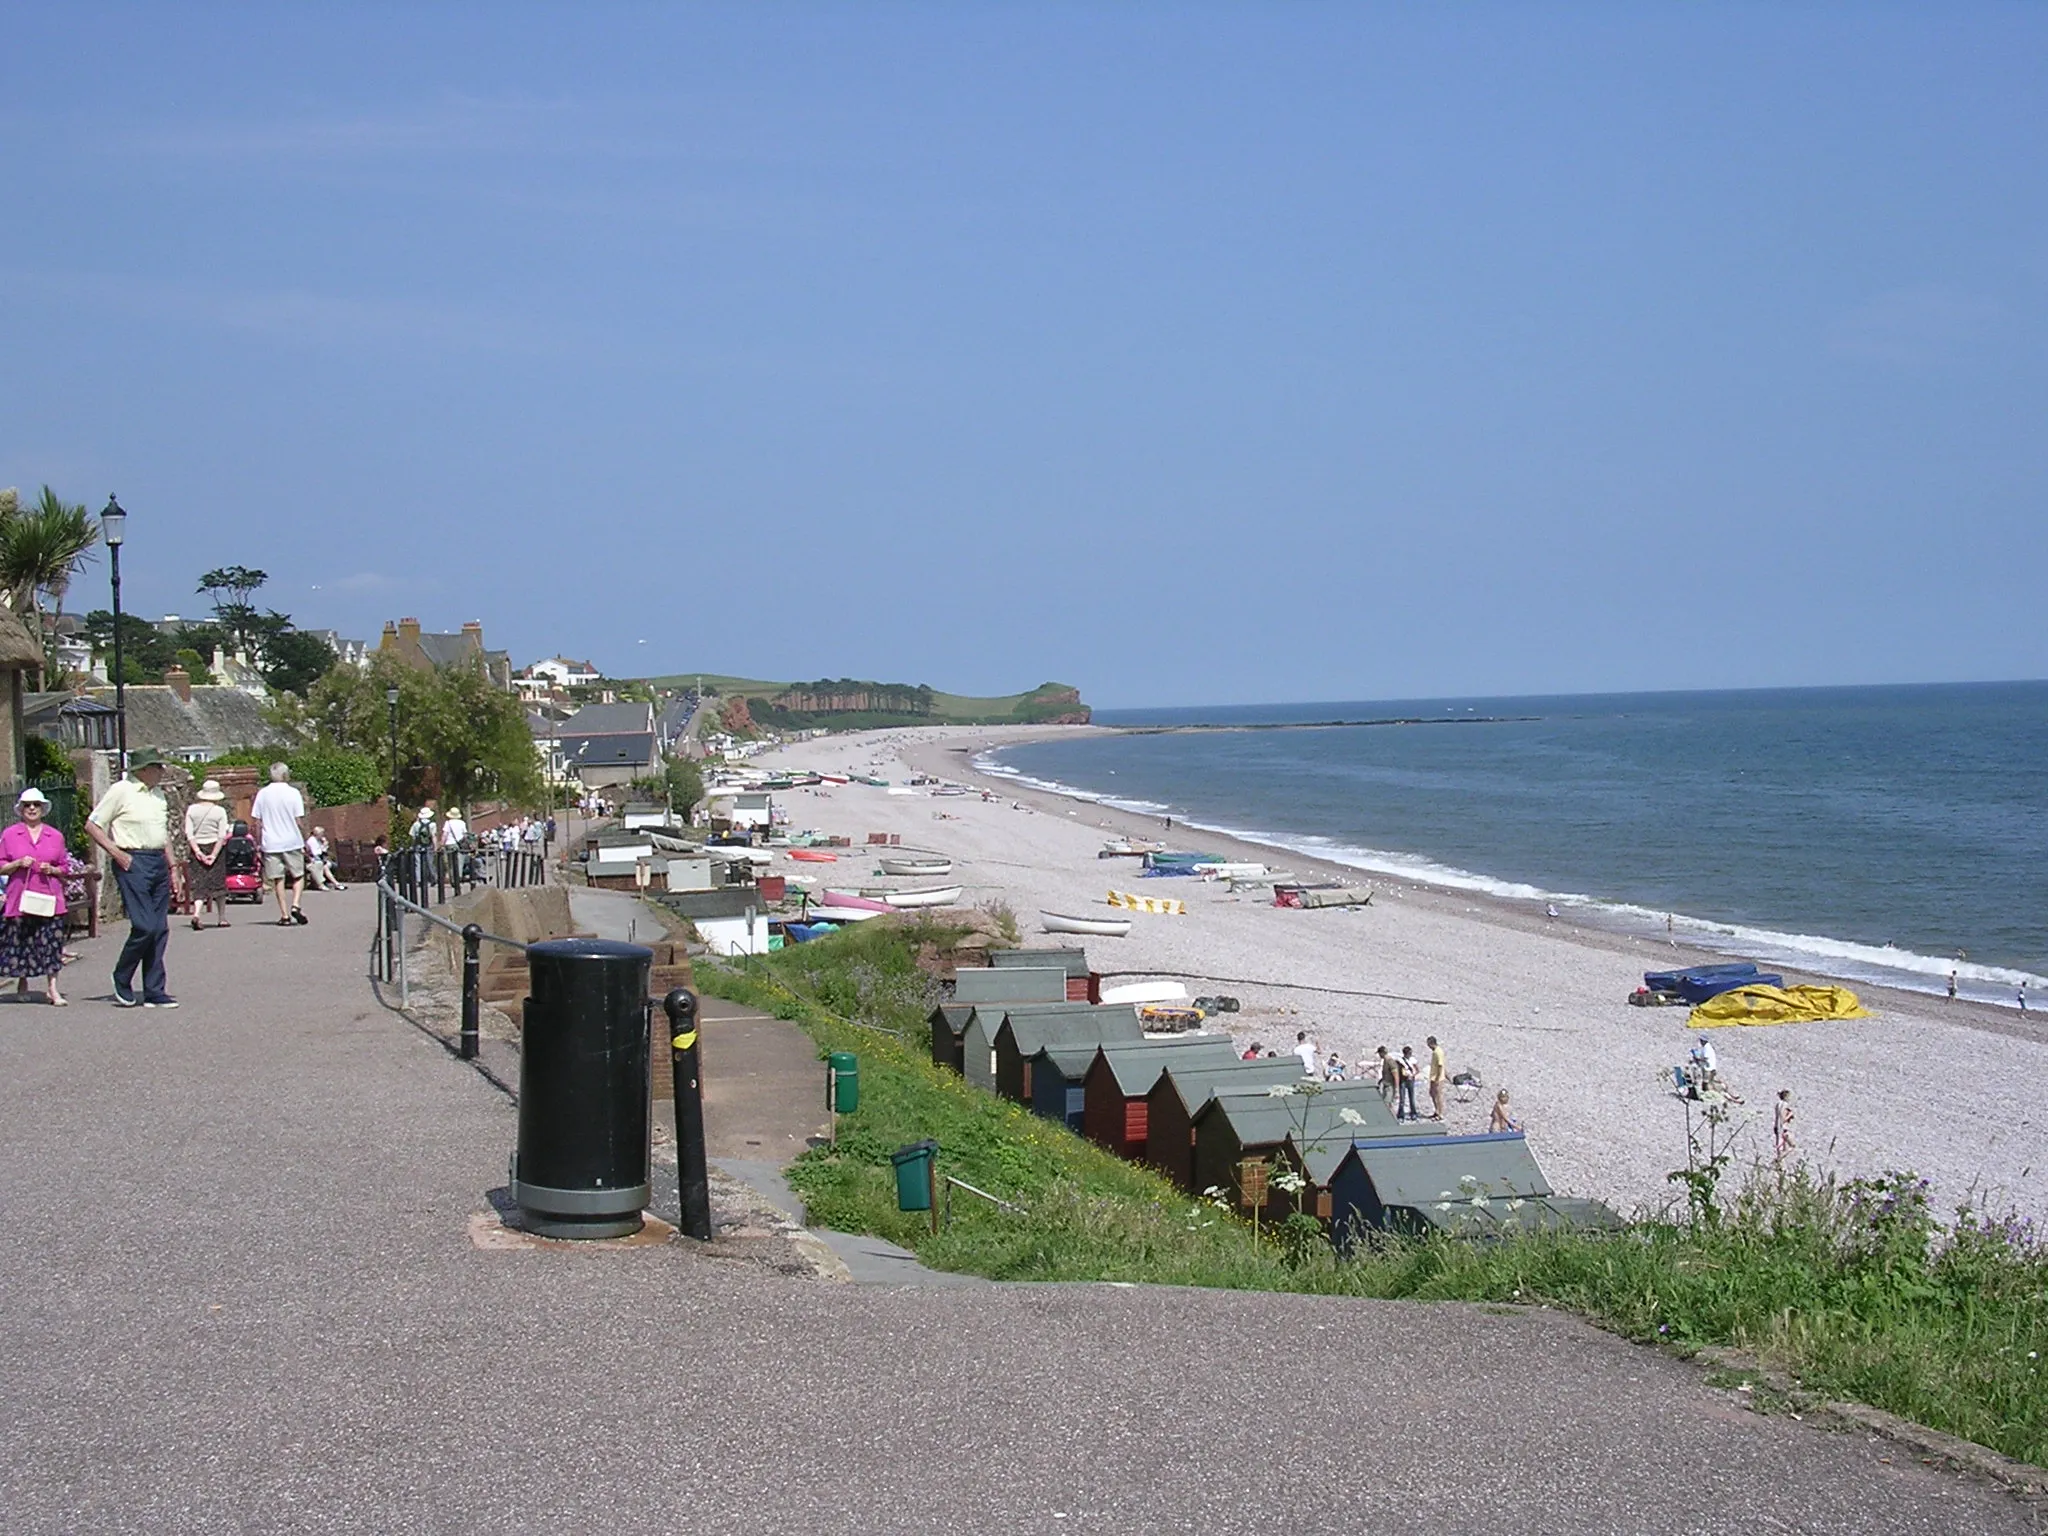 Photo showing: The beach at Budleigh Salterton
Photo by me